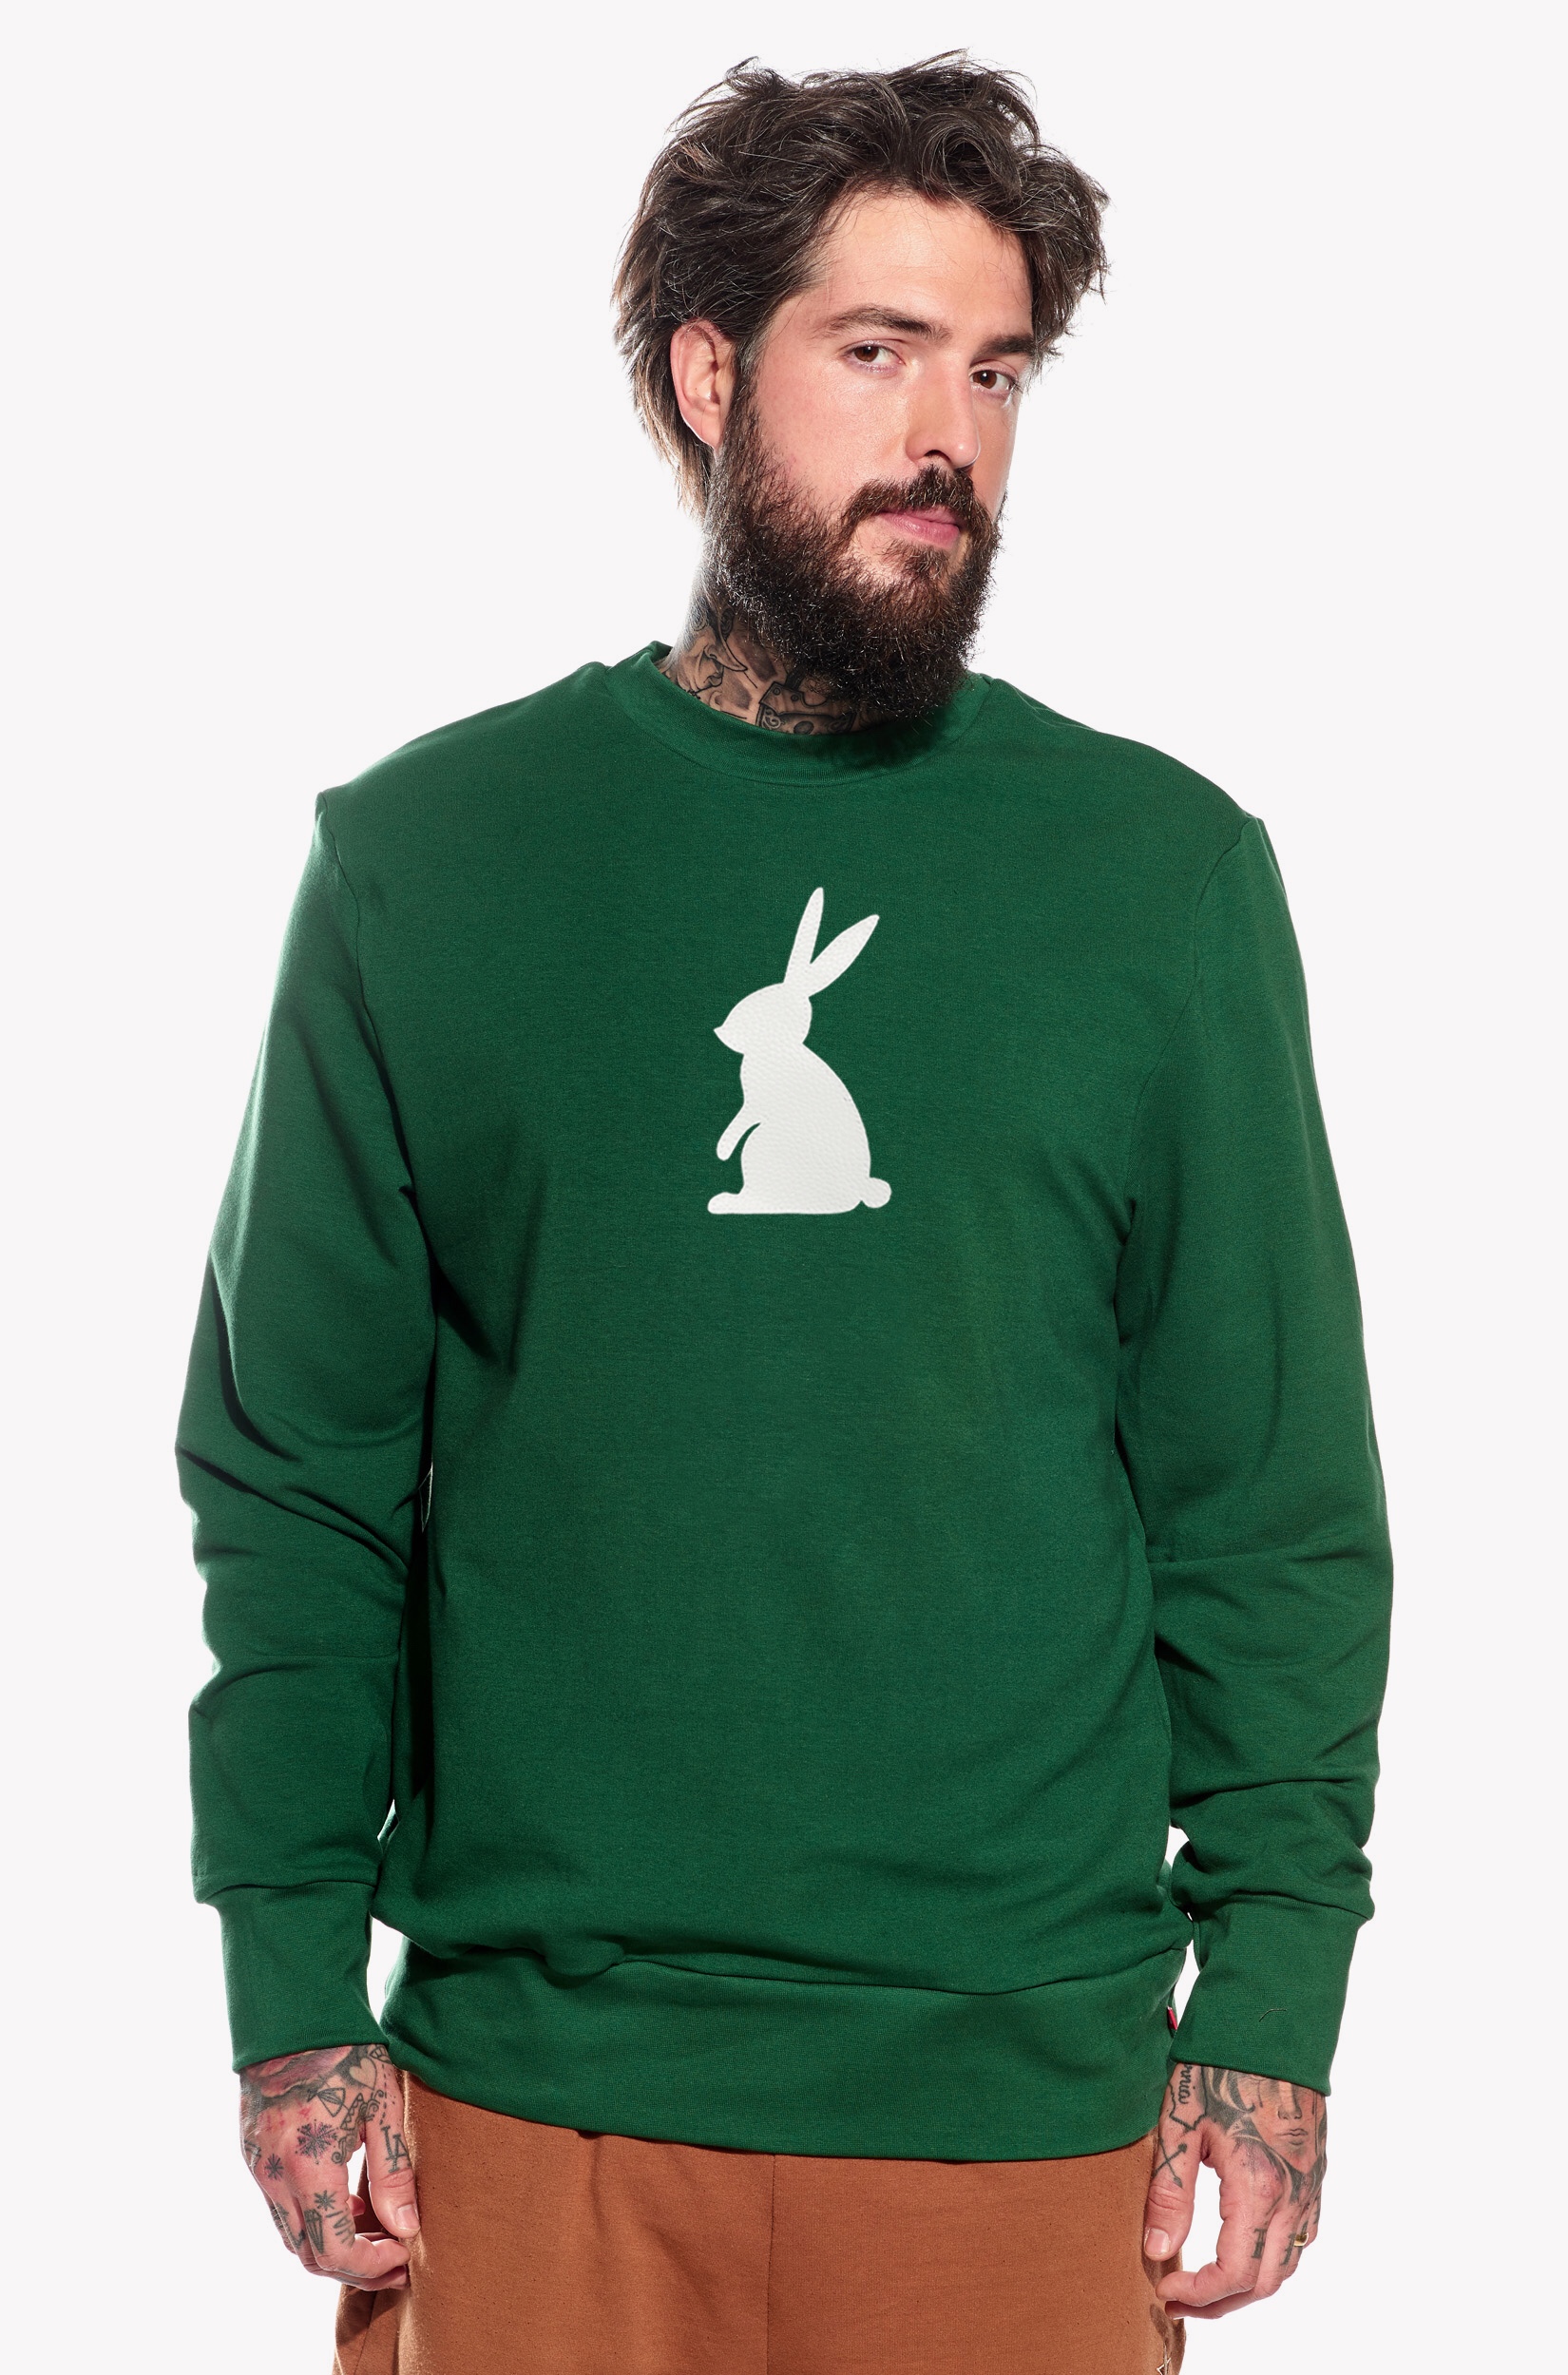 Hoodie with rabbit